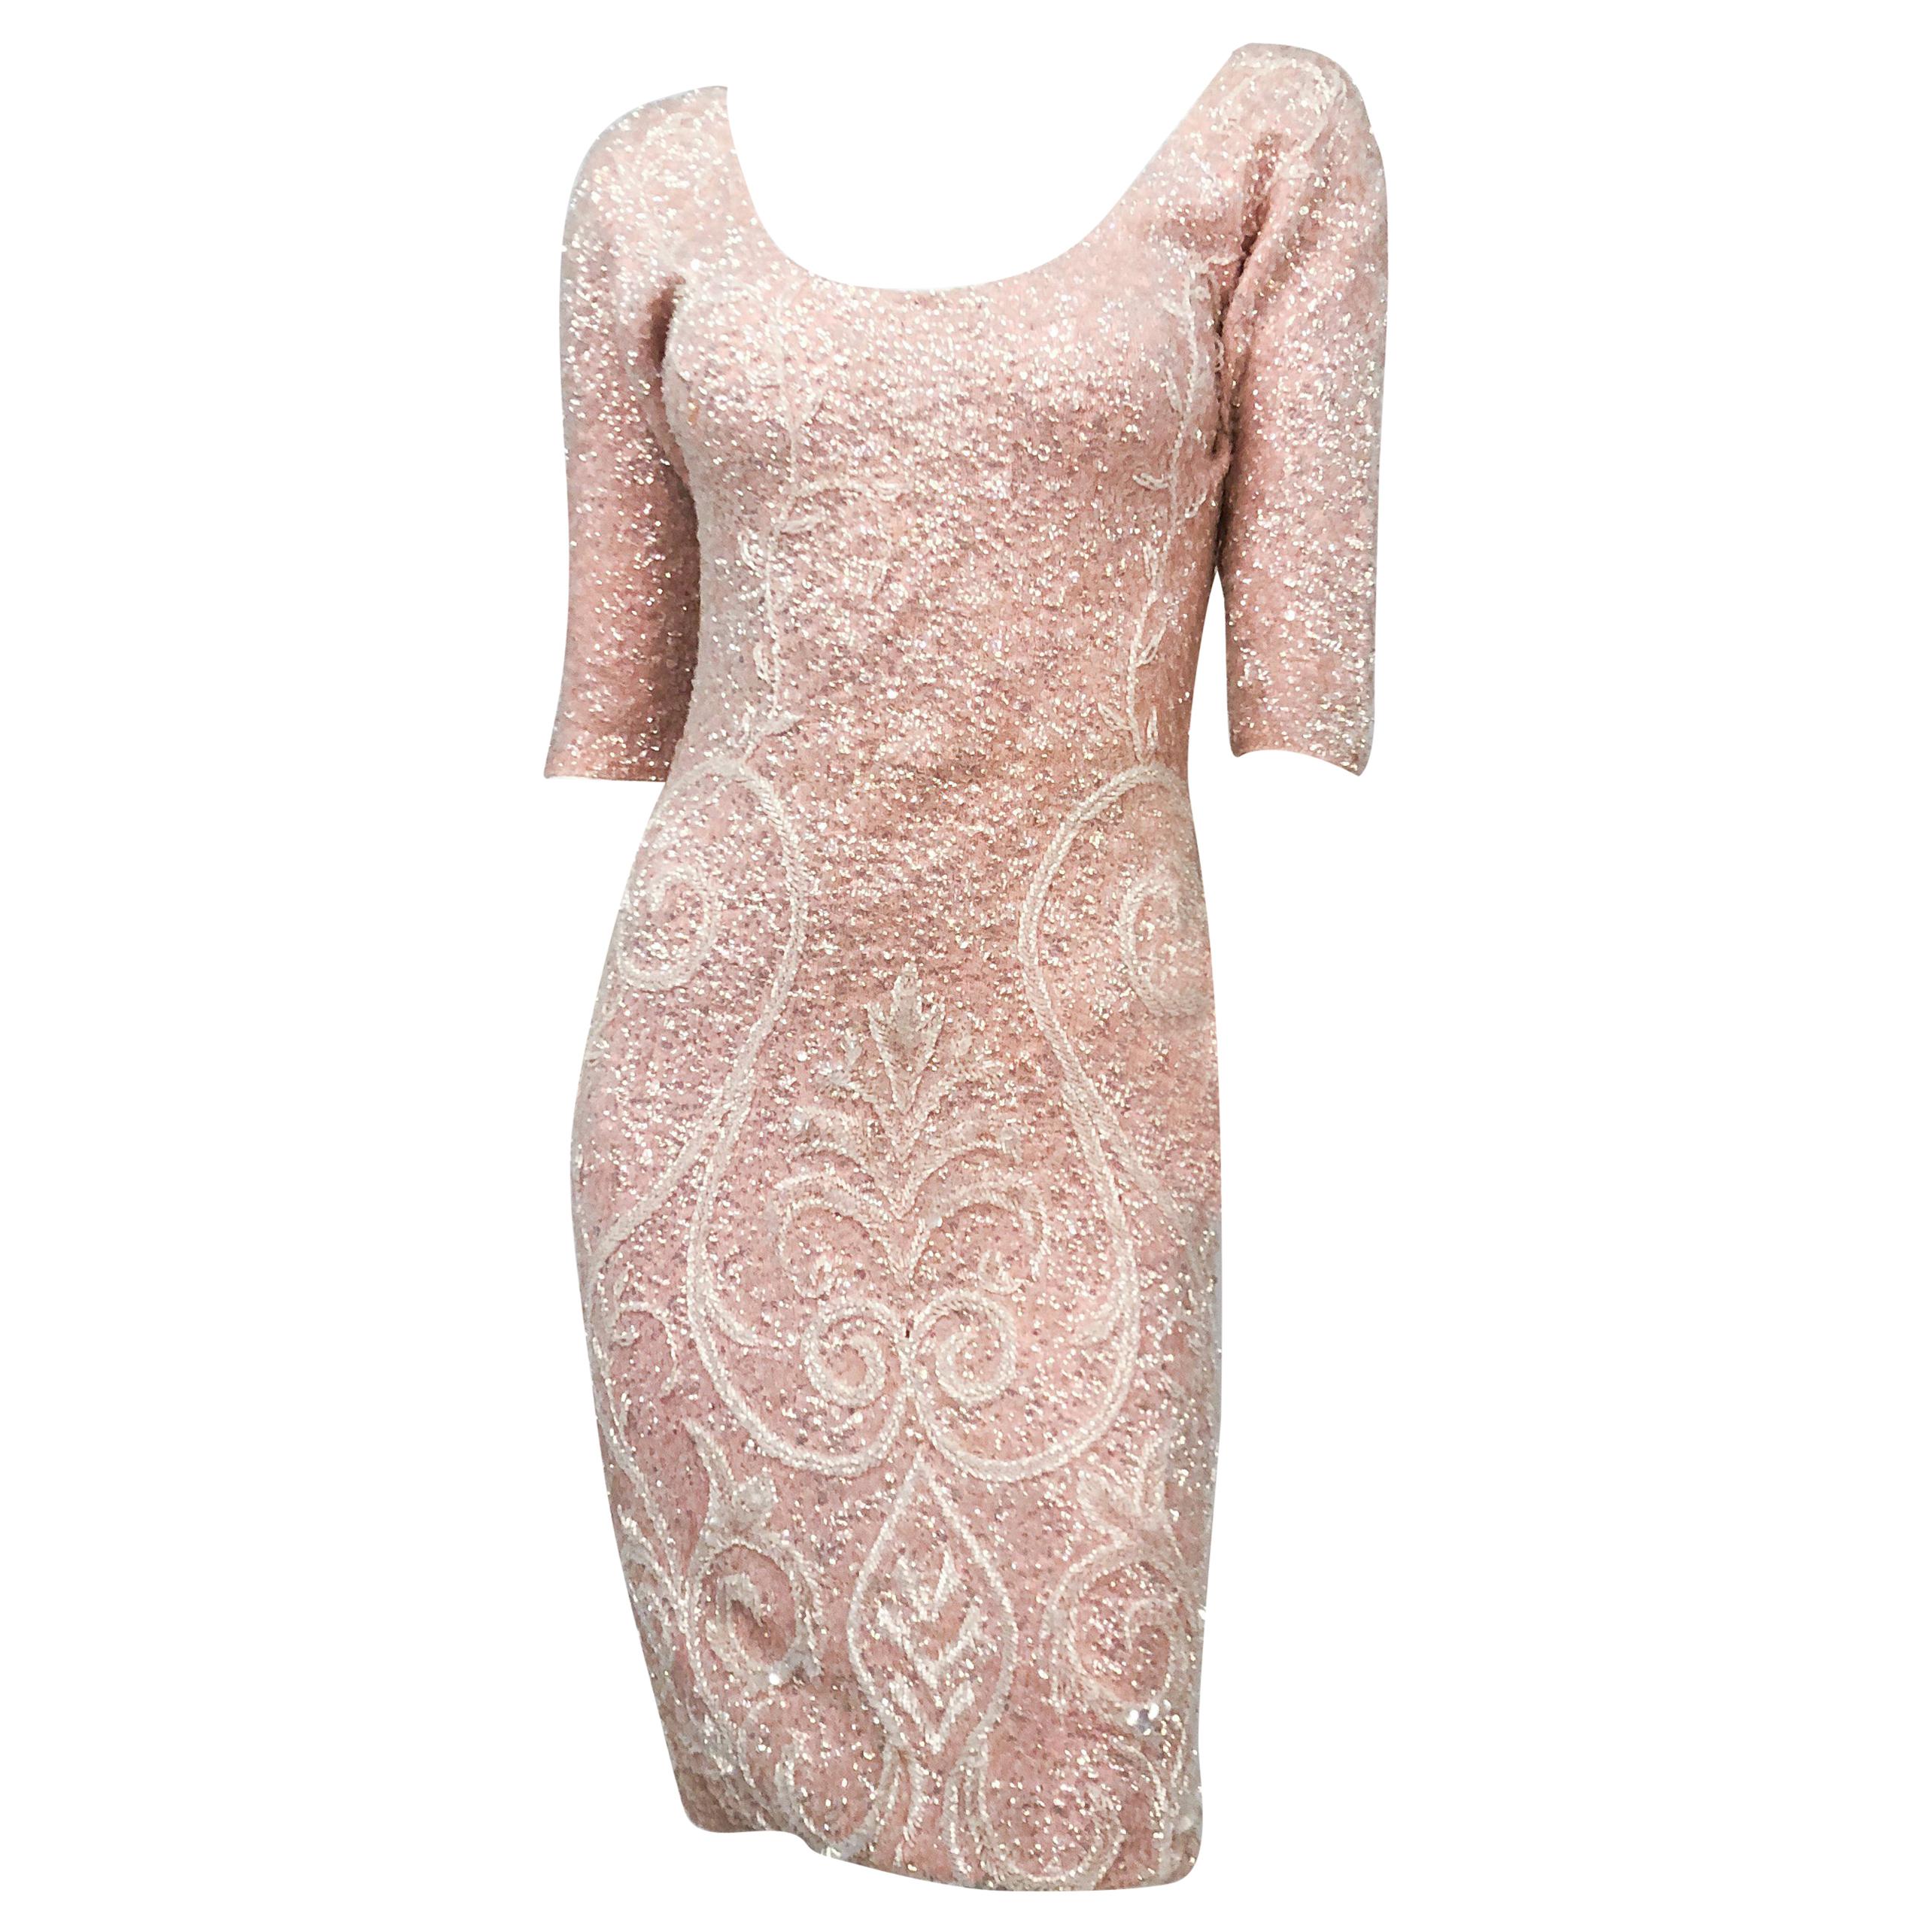 1960s Bink Sequin and Beaded Knit Dress